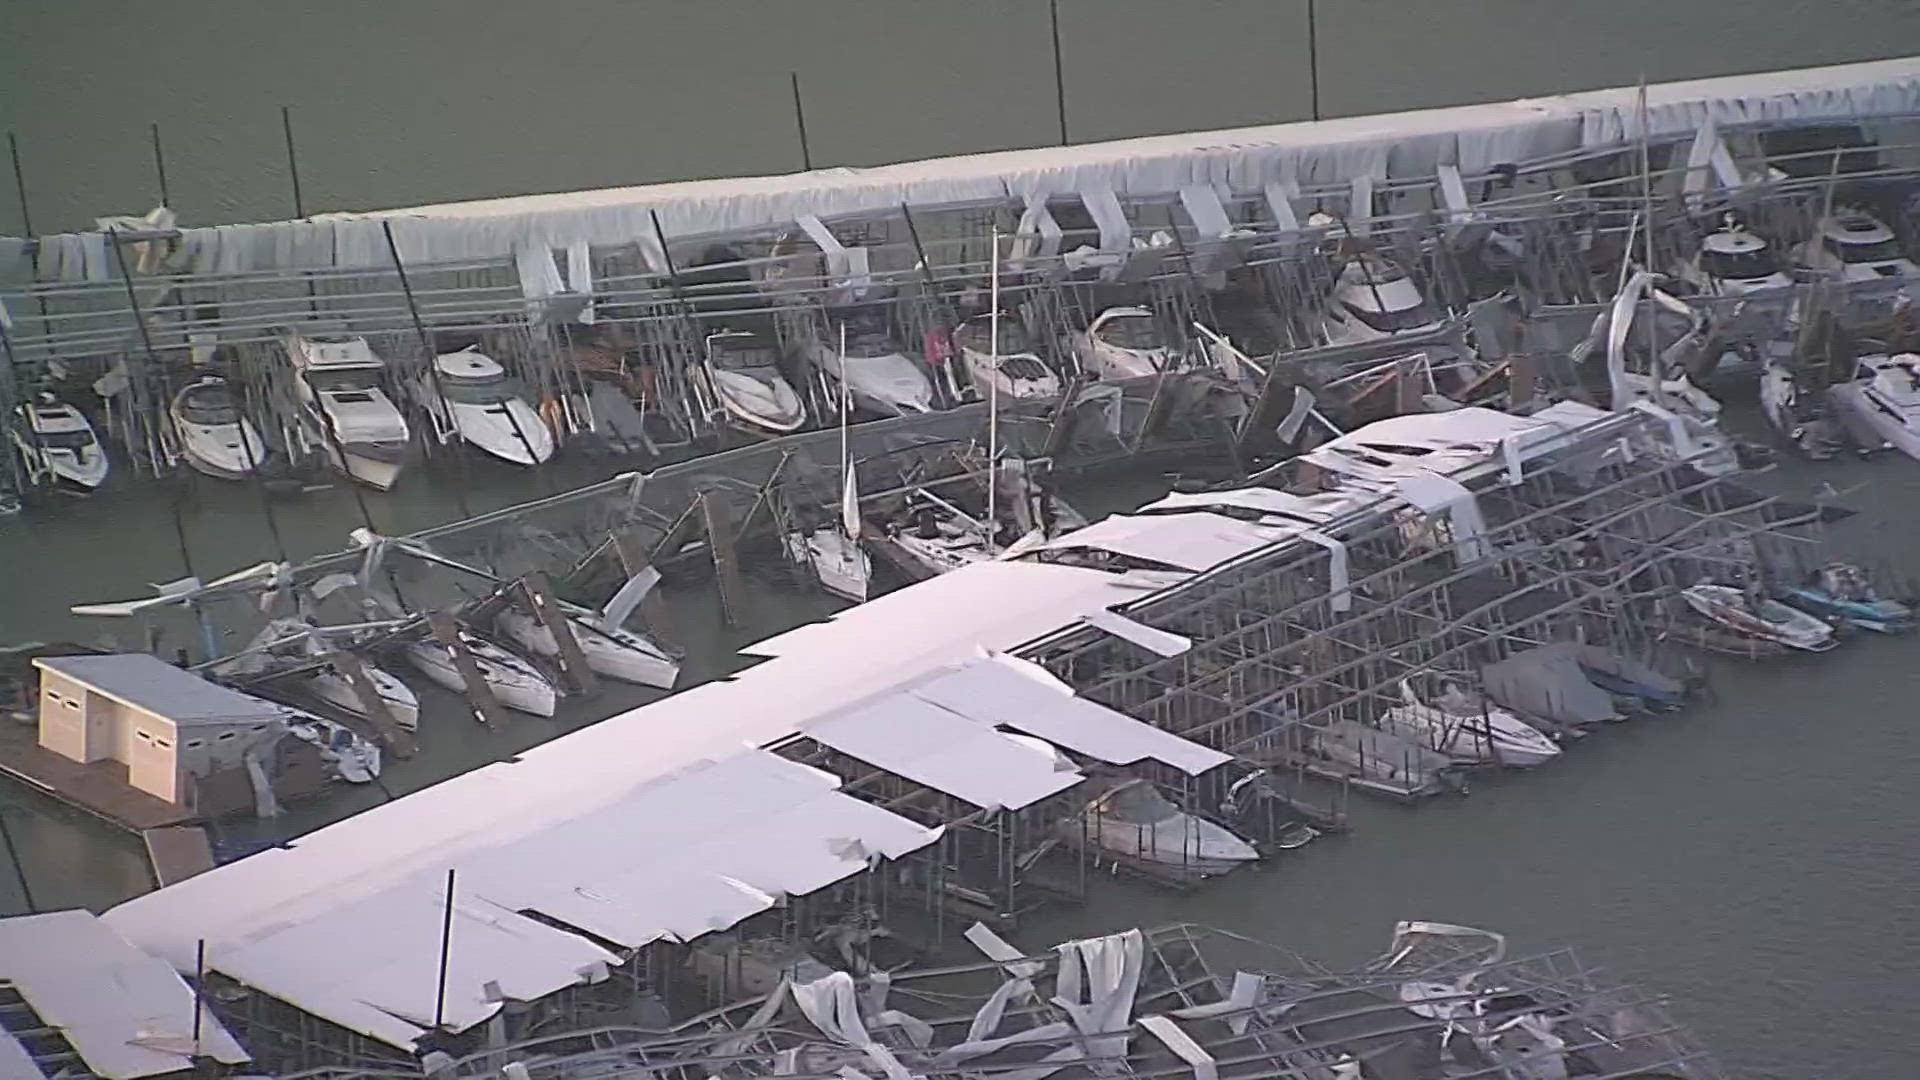 Heavy damage was seen at a Lake Lewisville marina on Friday morning after Thursday night's storms.